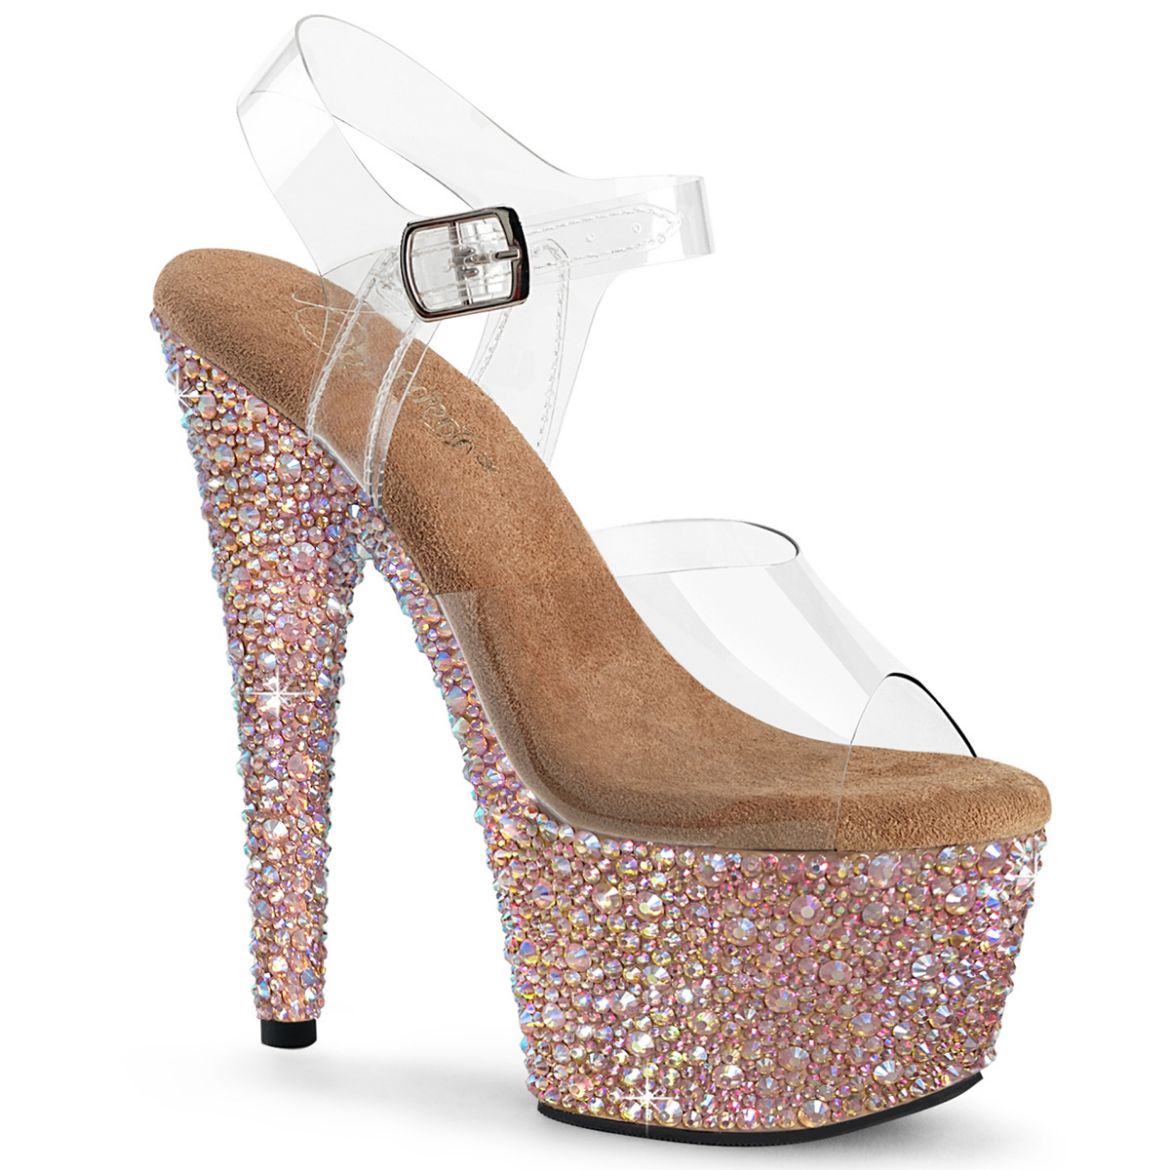 Product image of Pleaser BEJEWELED-708MS Clr/Rose Gold Multi RS 7 Inch Heel 2 3/4 Inch PF Ankle Strap Sandal w/Multi Sized RS